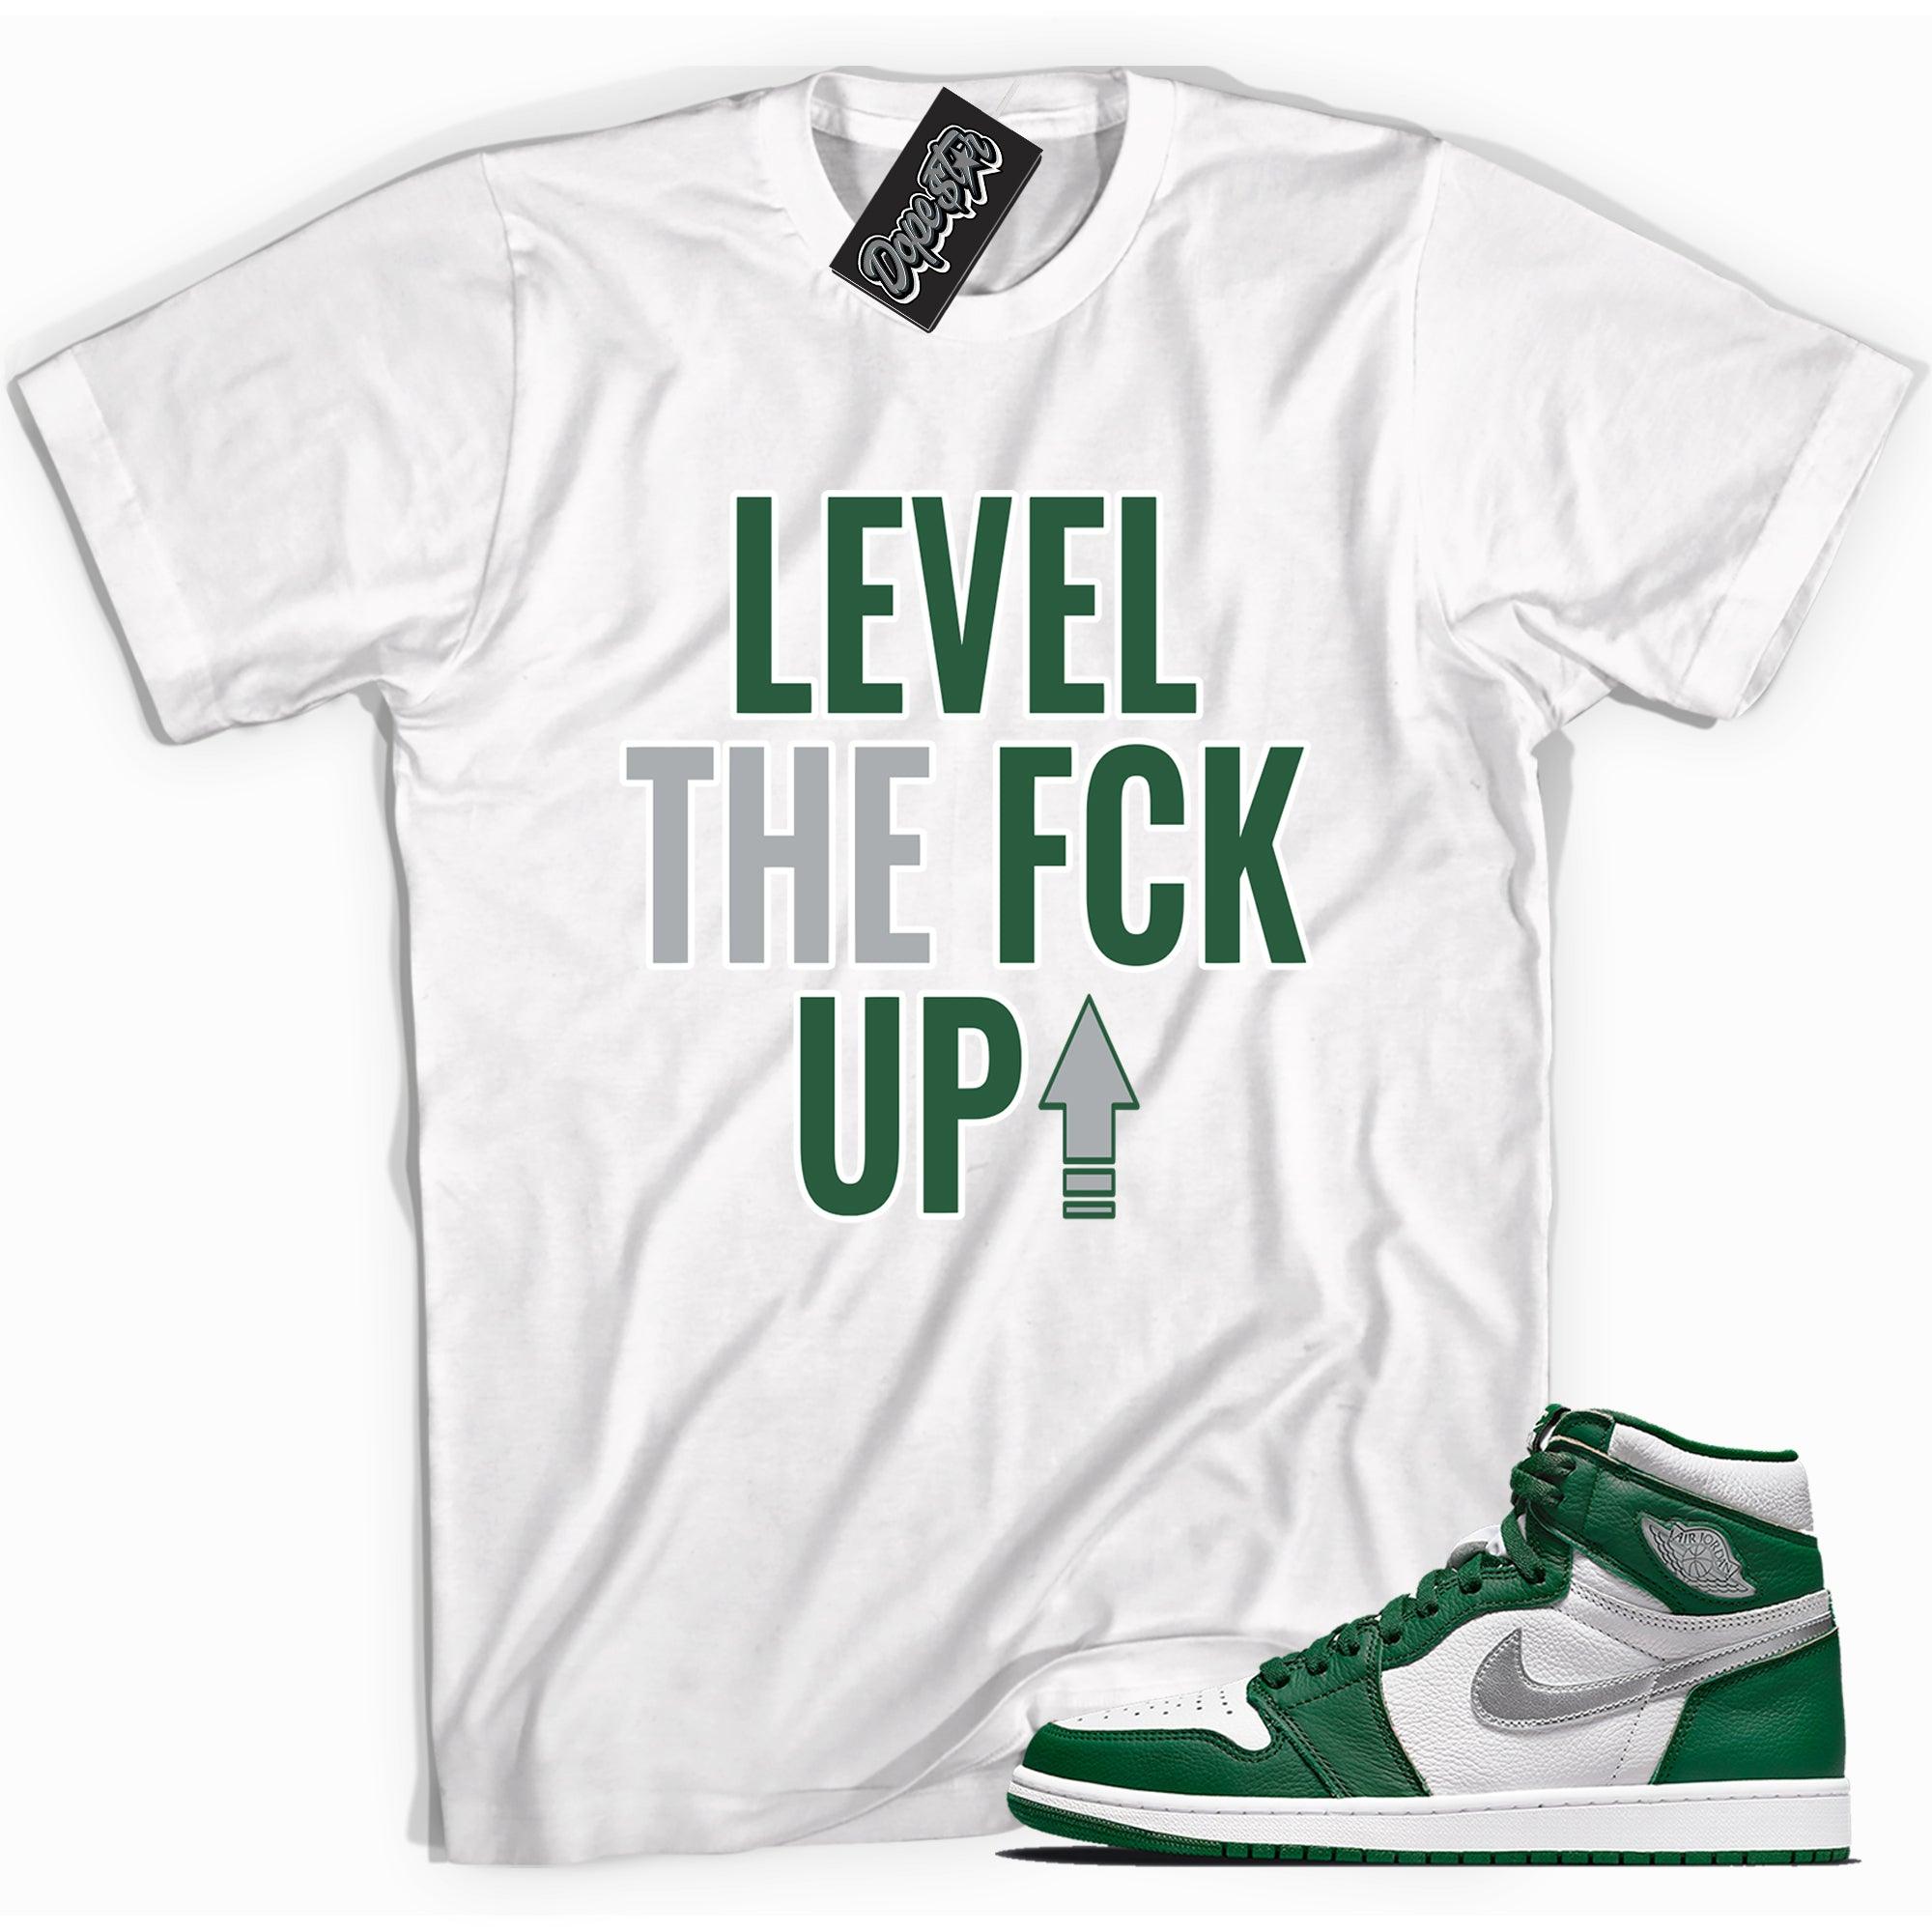 Cool white graphic tee with 'Level Up' print, that perfectly matches Air Jordan 1 Retro High OG Gorge Green sneakers.